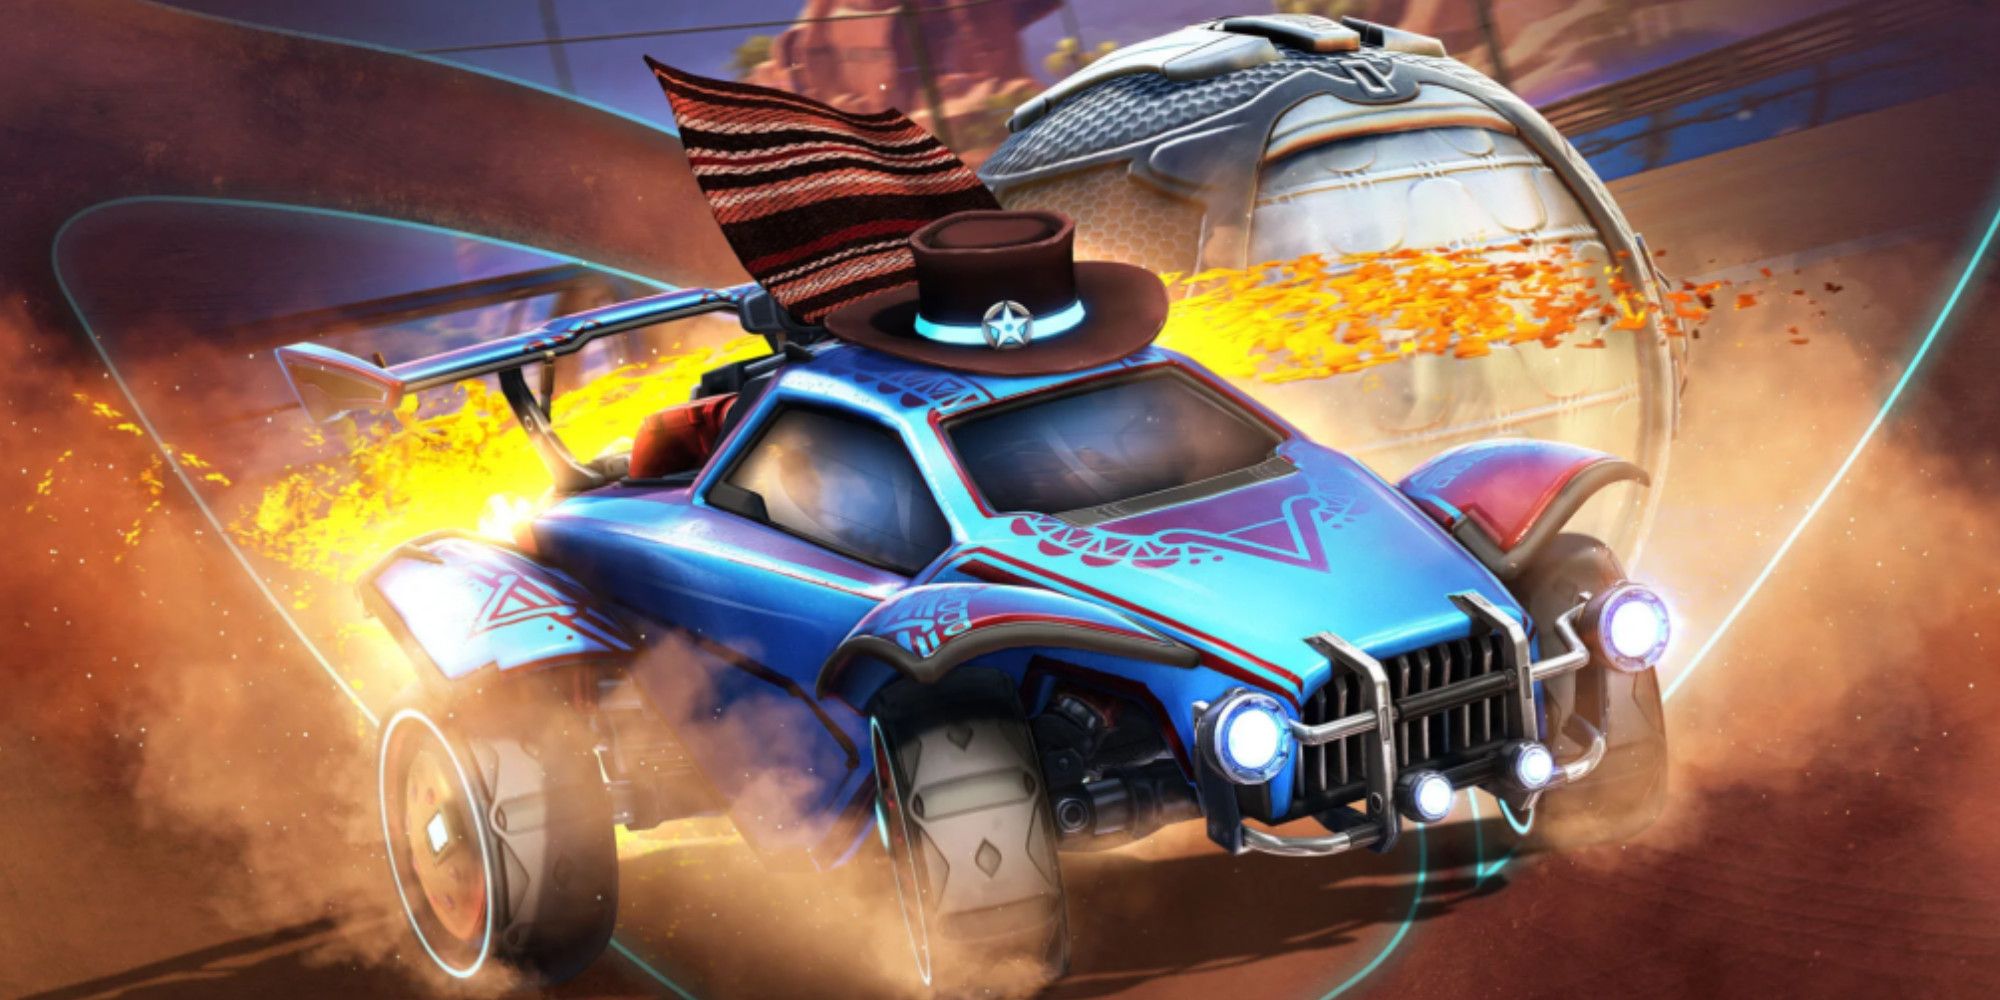 Rocket League Outlaw action shot with dust and flames